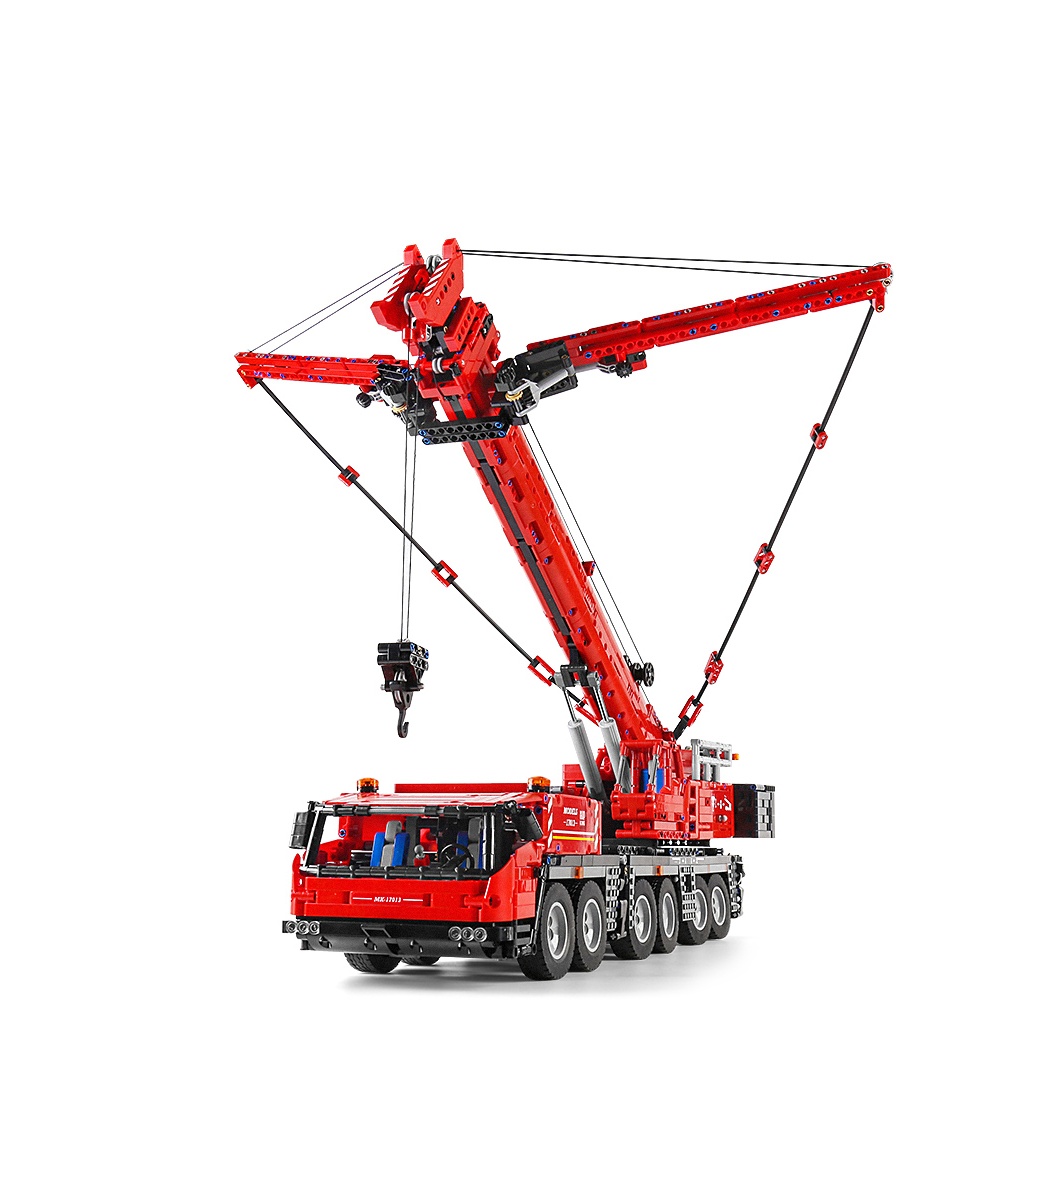 Mould king 17013 - GMK Grove Mobile Crane - Review 